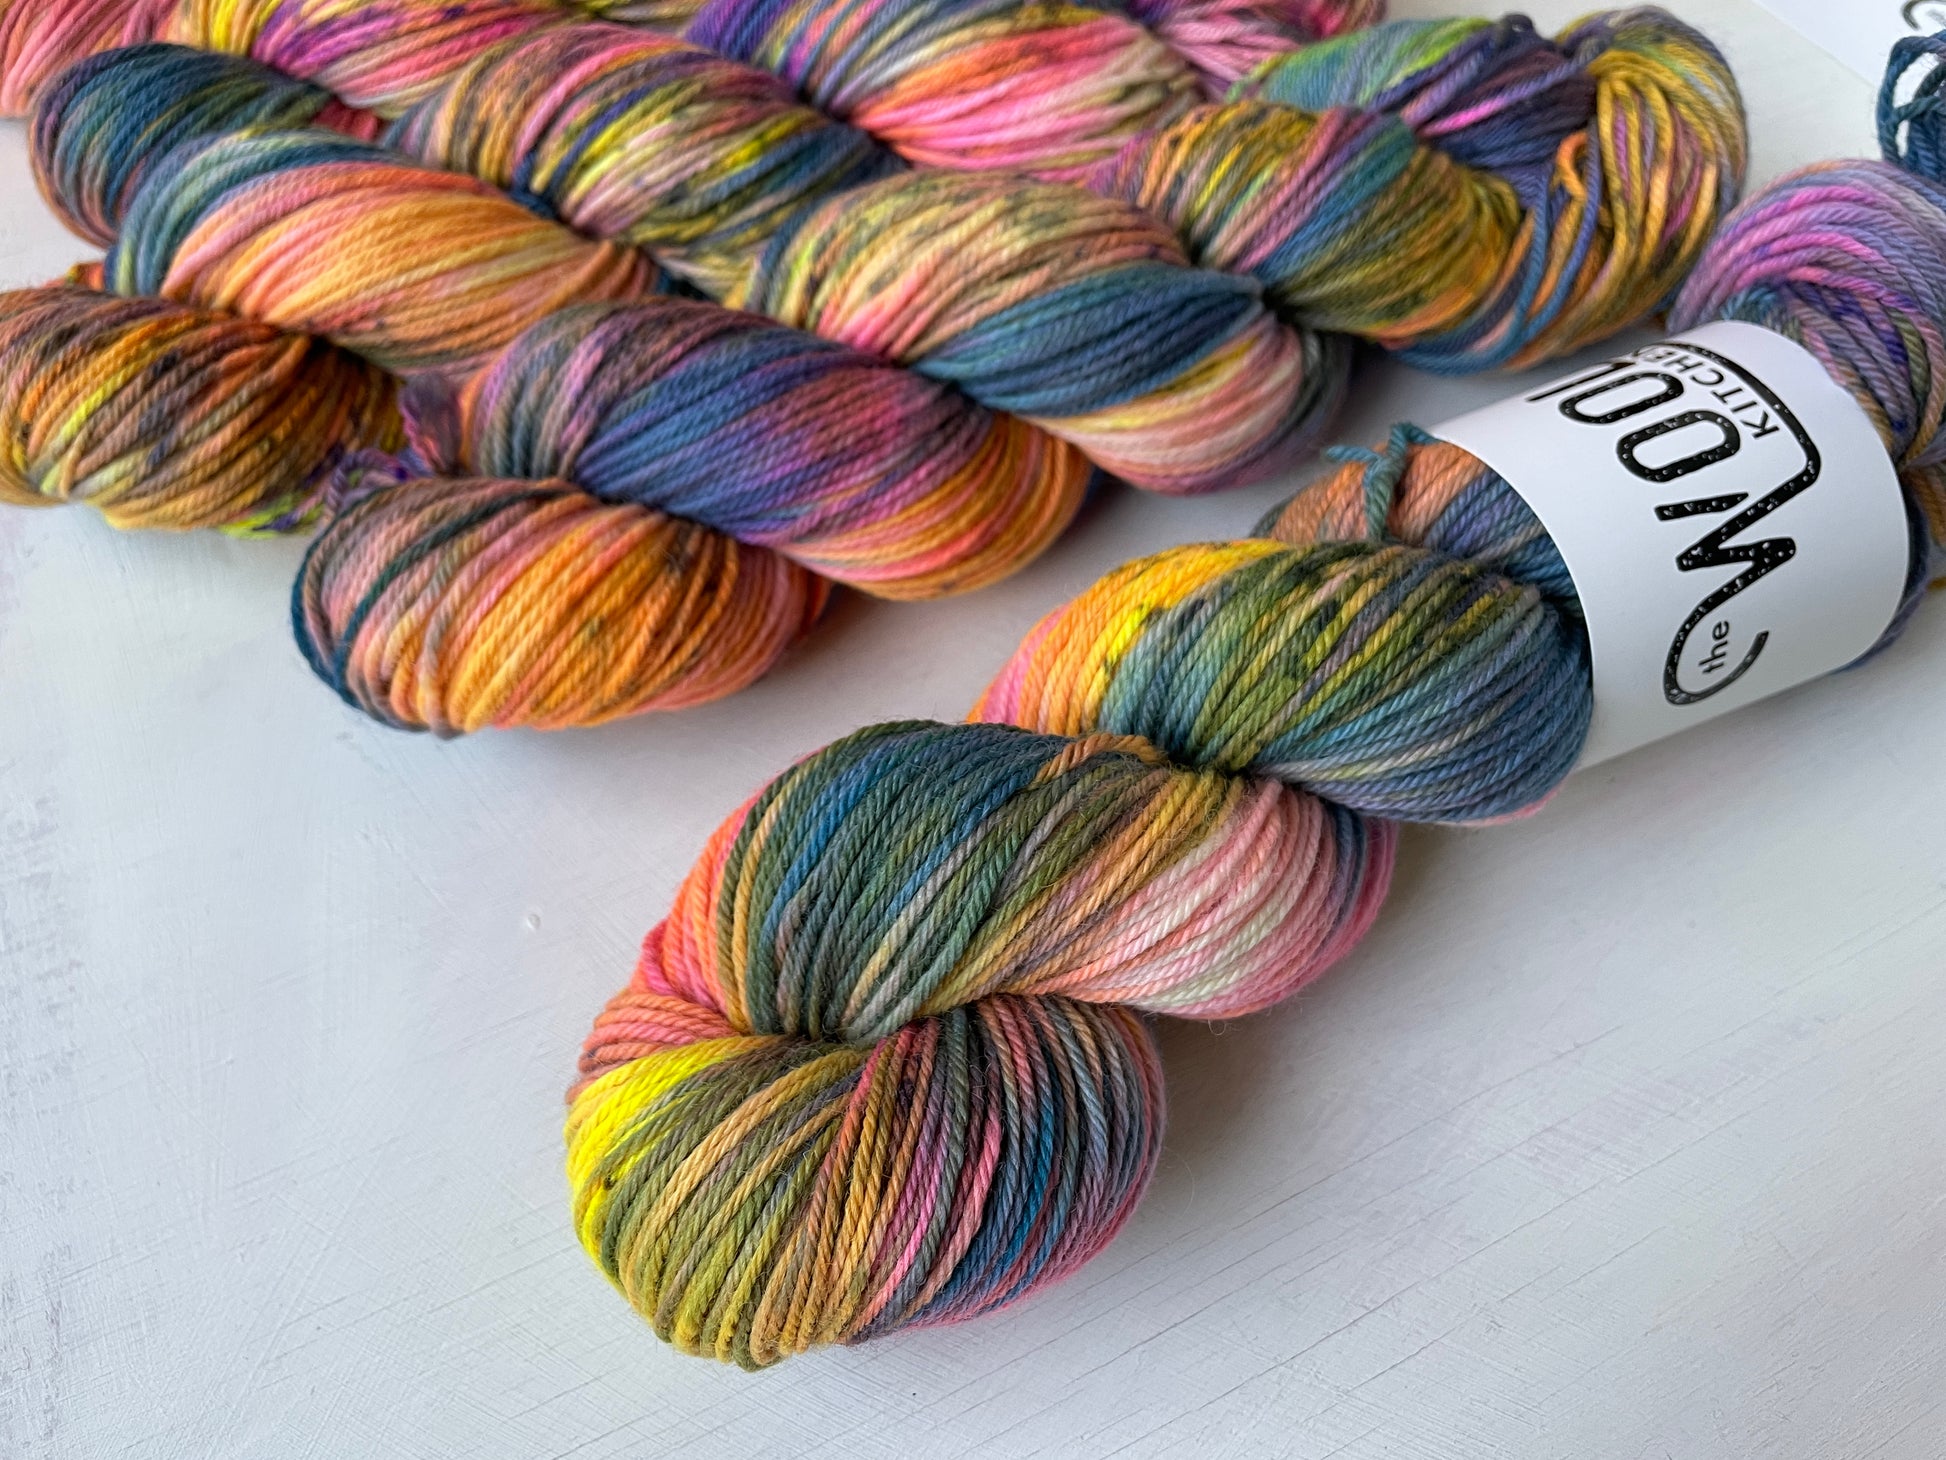 Hesperides BFL DK Wool from the hand dyed yarn expert, The Wool Kitchen